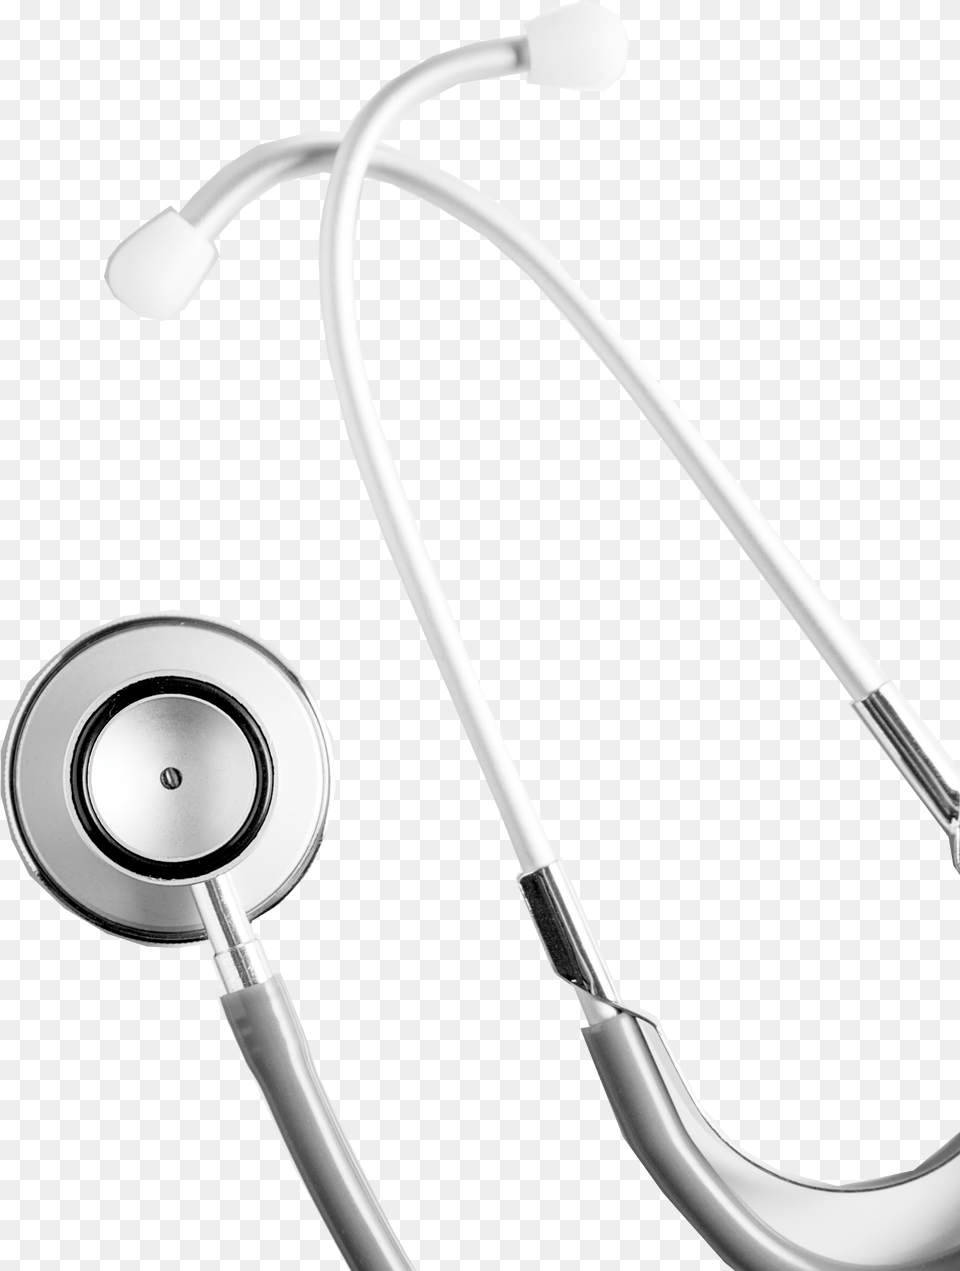 Stethoscope Good News From Finland Bathroom Scale, Electronics, Smoke Pipe Free Transparent Png